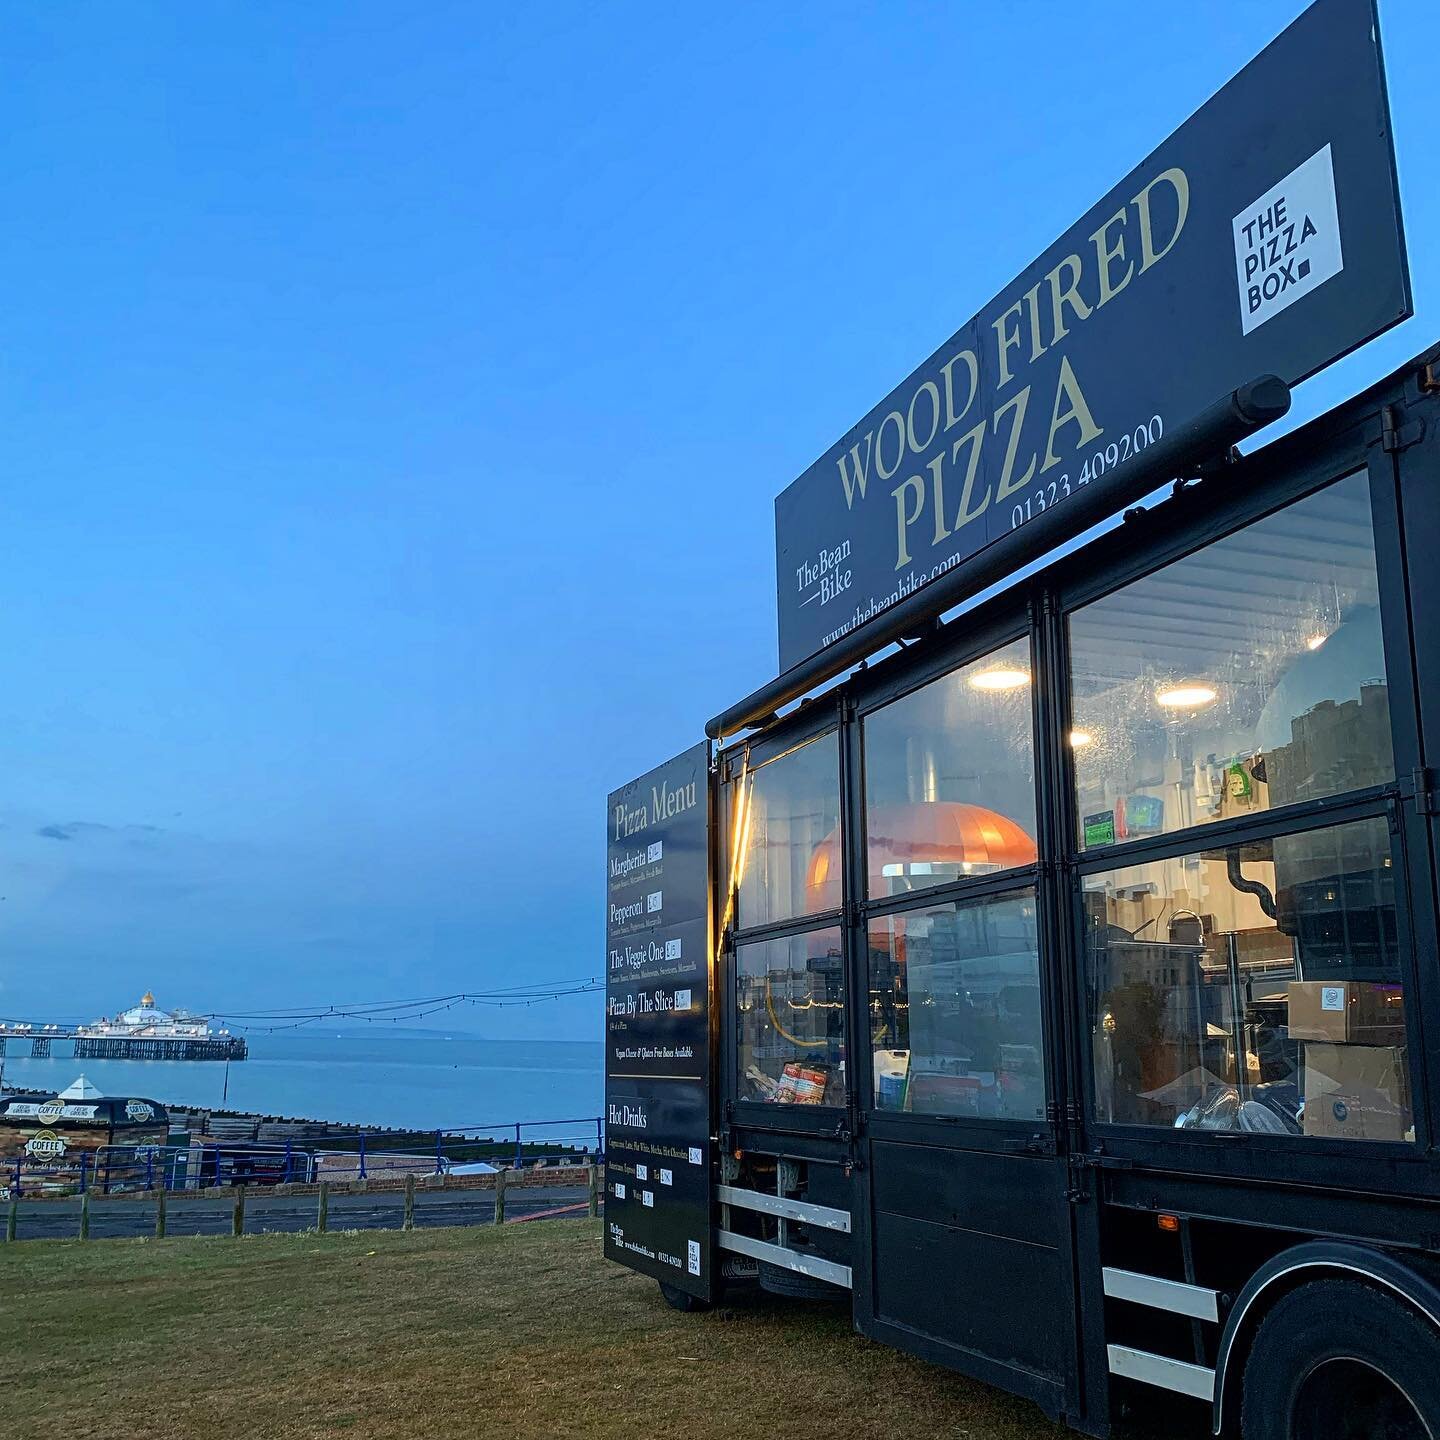 Come and find us at this years @eastbourneinternationalairshow ! We are  situated by the Wish Tower with our Pizza Truck serving some tasty woodfired pizzas!! 🍕